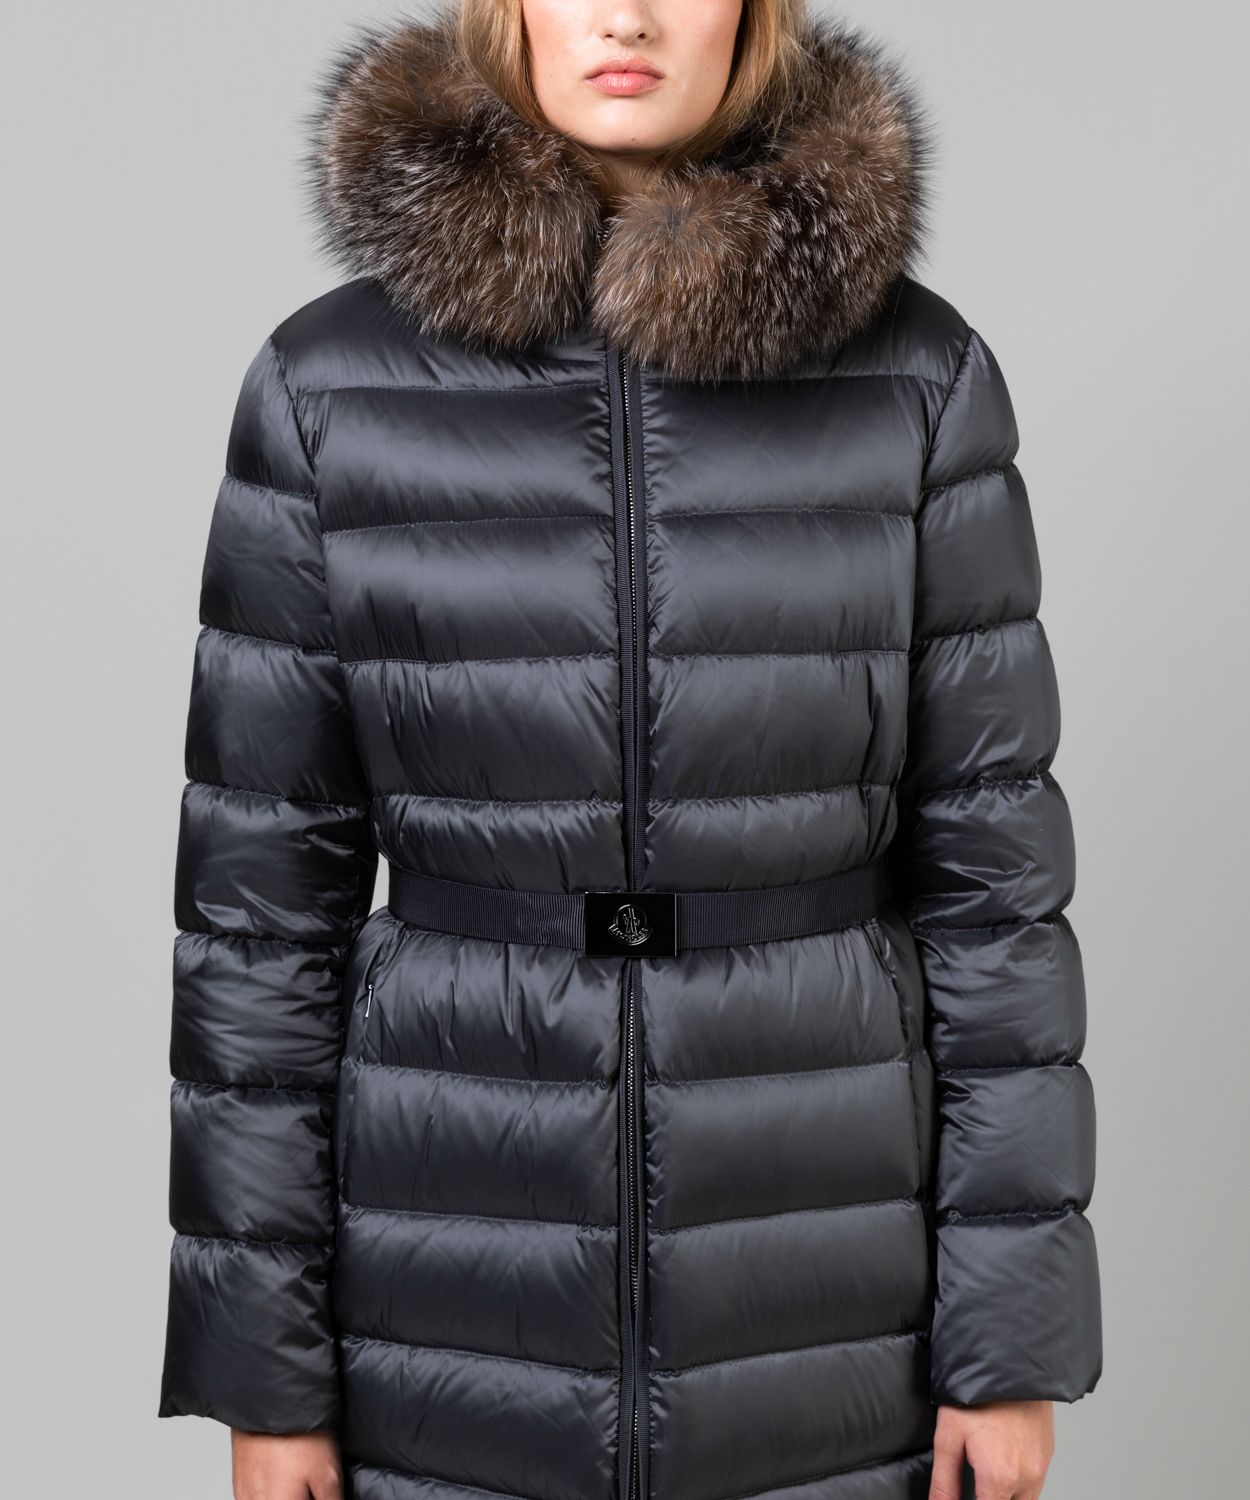 moncler coat with fur hood womens